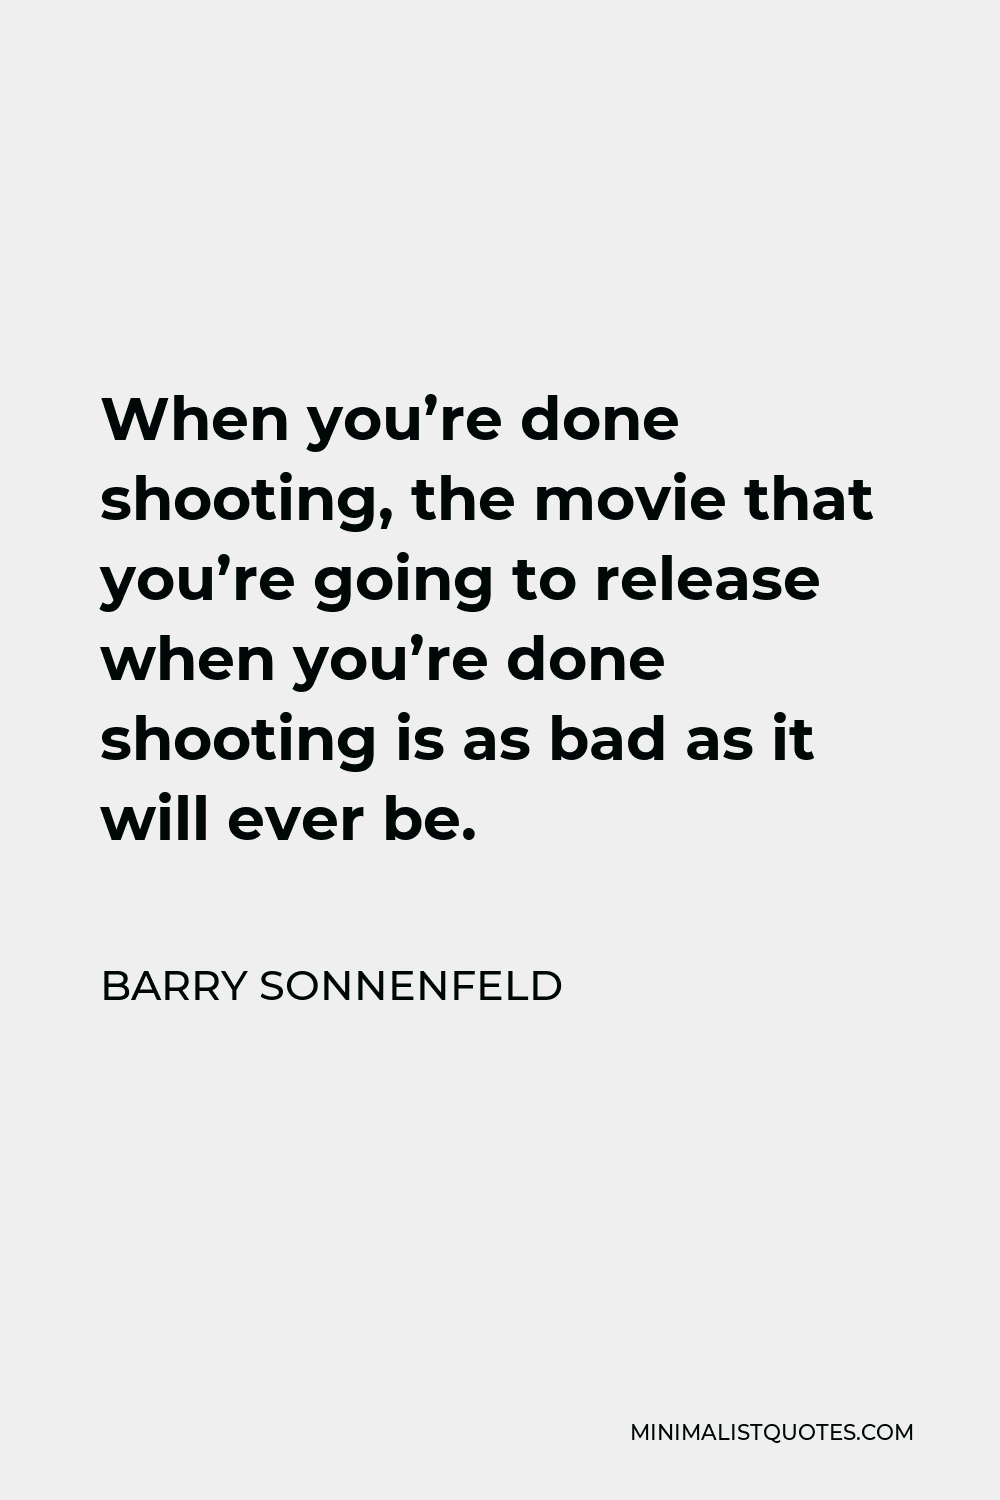 Barry Sonnenfeld Quote - When you’re done shooting, the movie that you’re going to release when you’re done shooting is as bad as it will ever be.